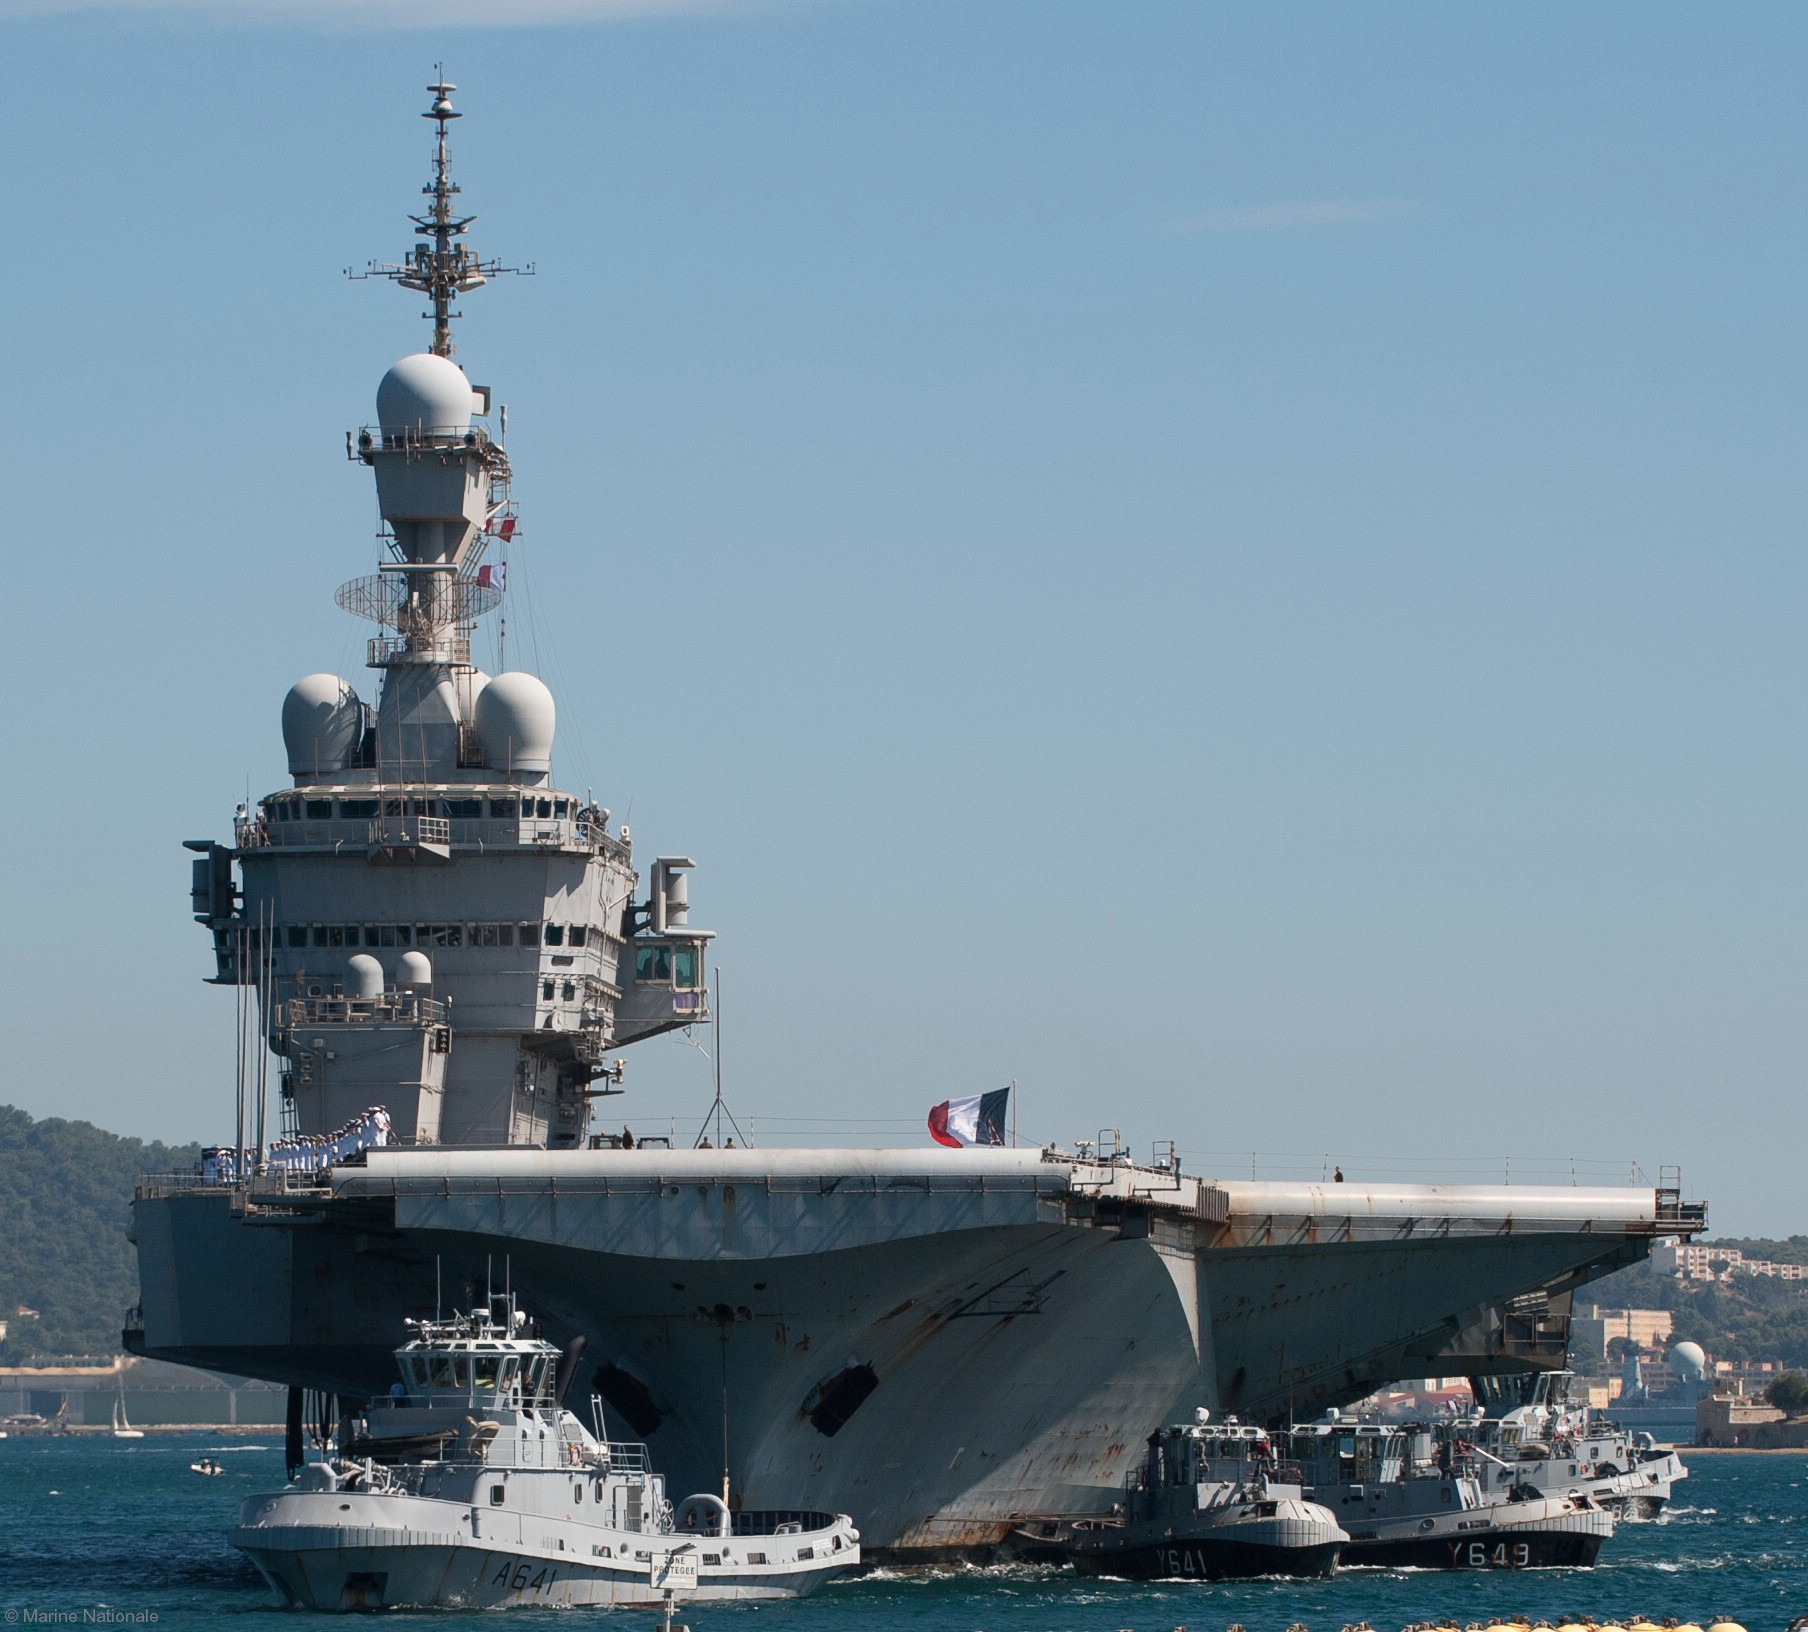  r-91 fs charles de gaulle aircraft carrier french navy marine nationale 41